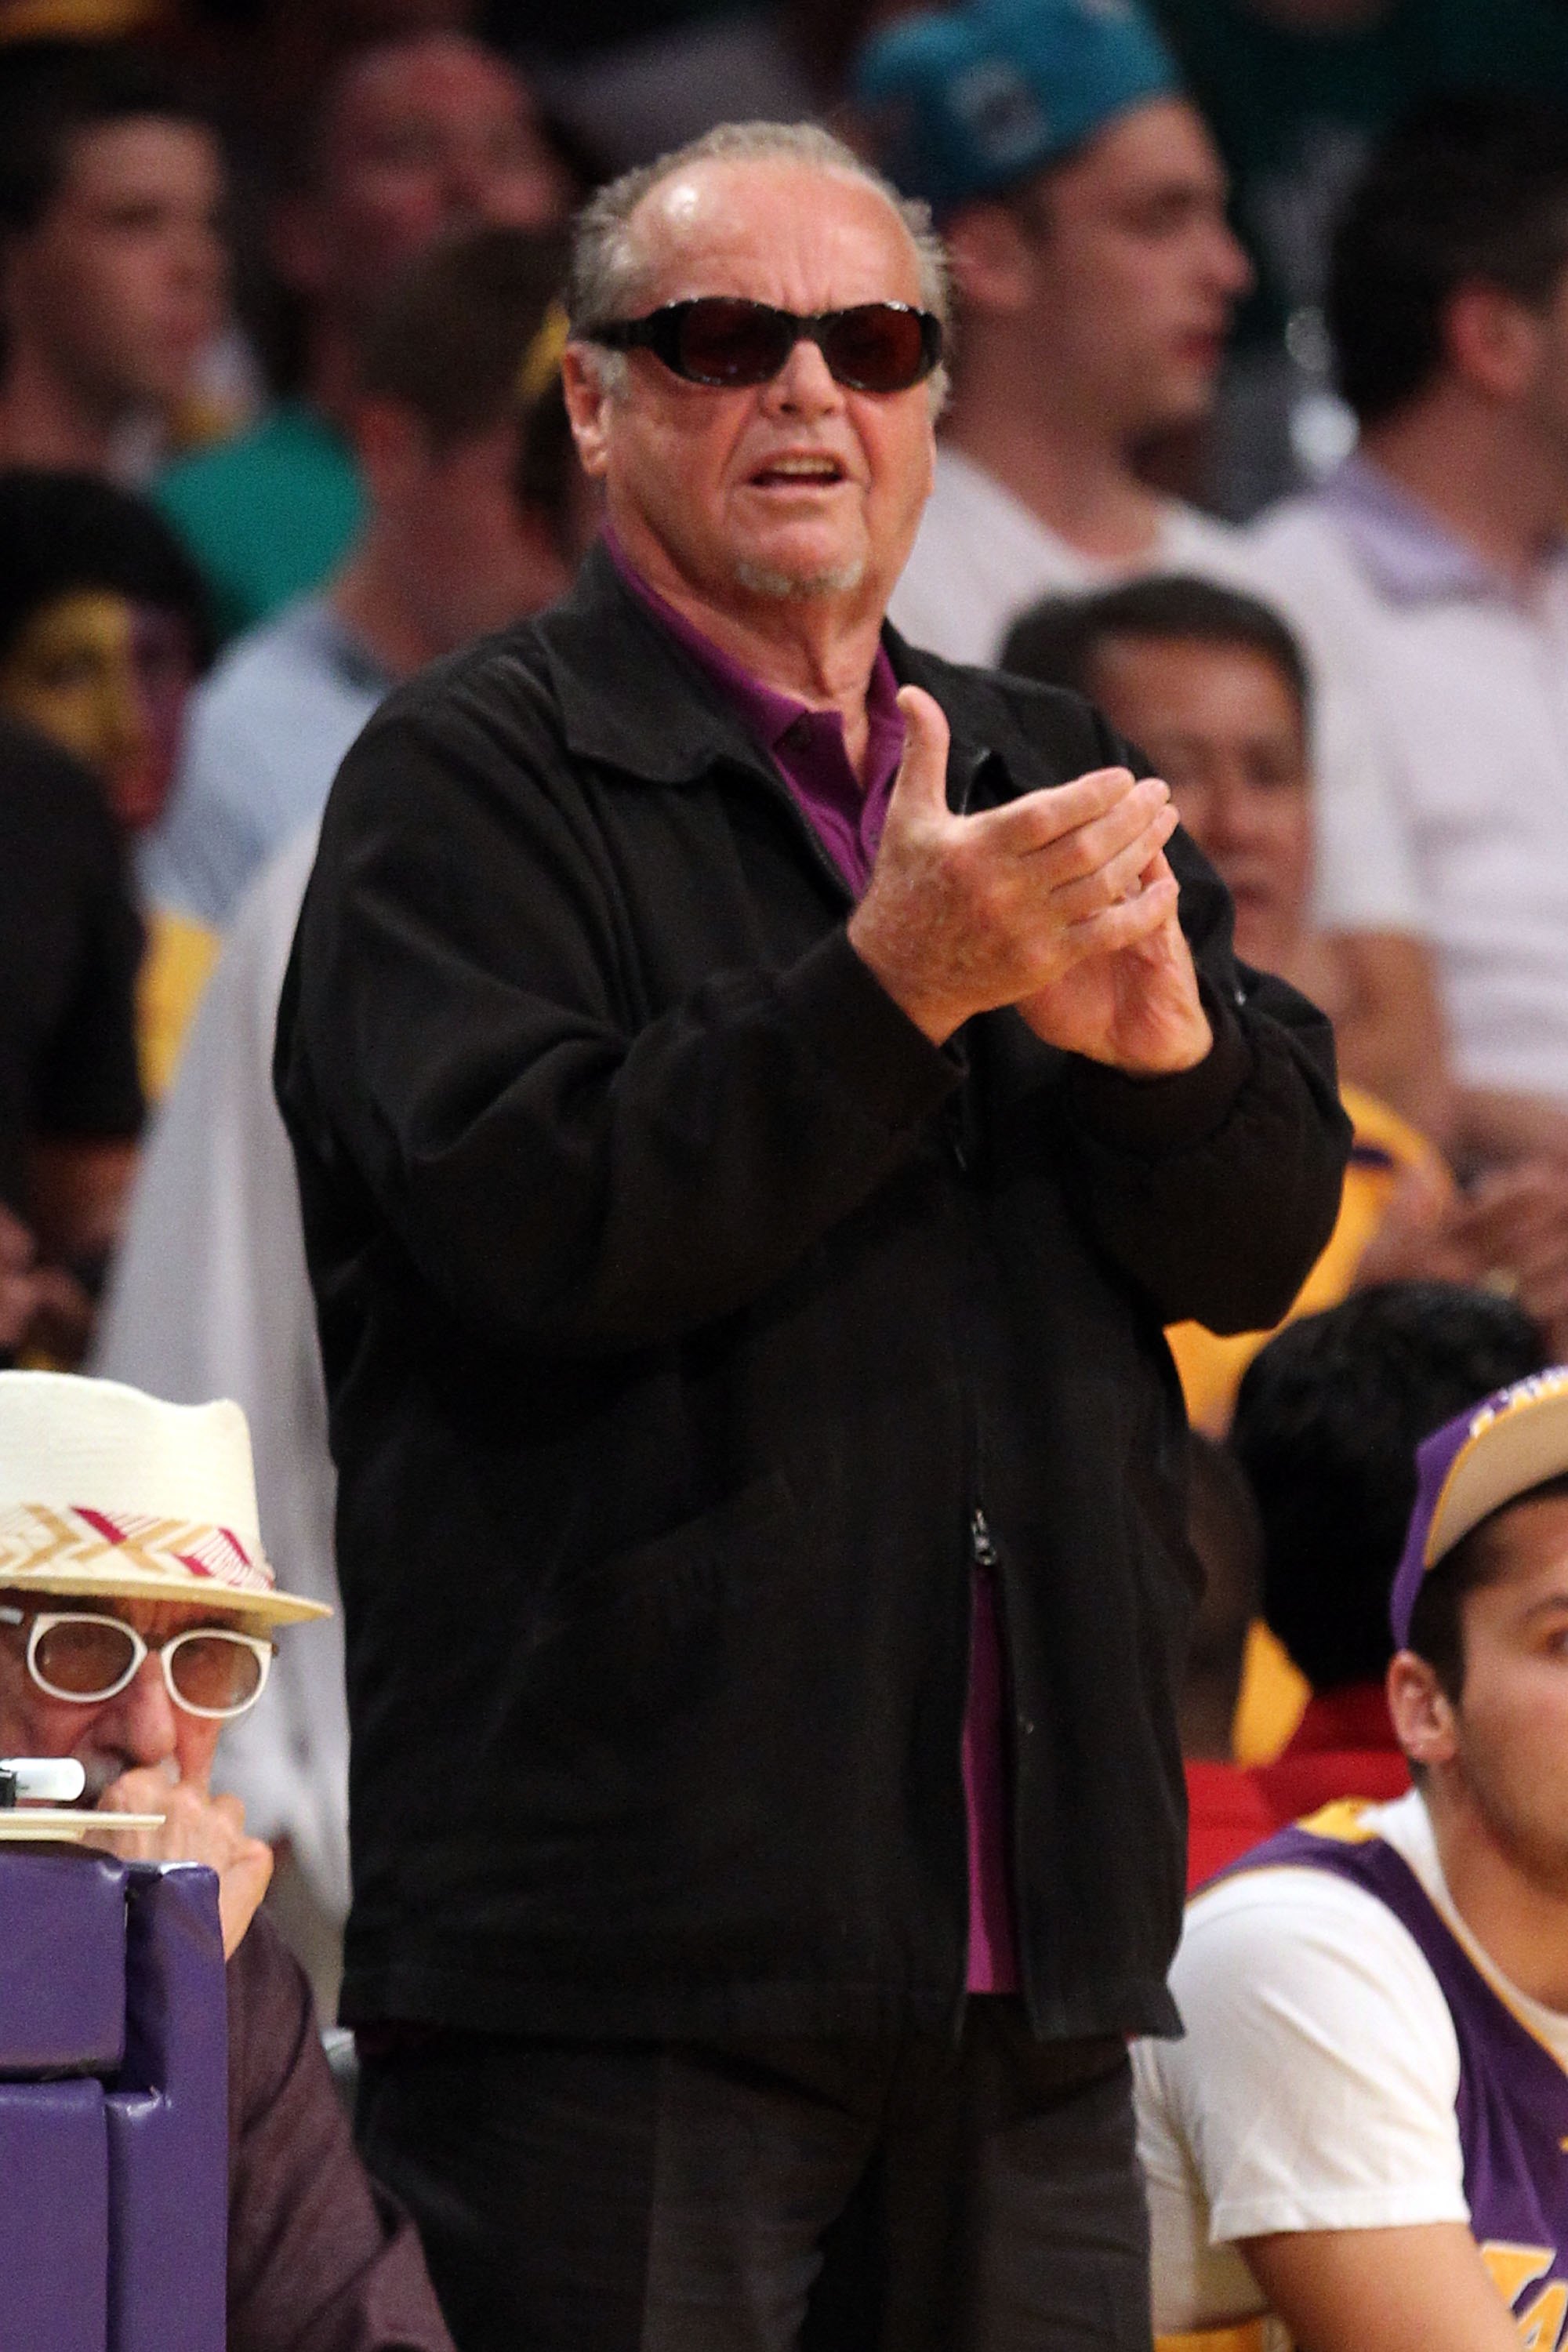 LOS ANGELES, CA - JUNE 17:  Actor Jack Nicholson watches Game Seven of the 2010 NBA Finals at Staples Center between the Boston Celtics and the Los Angeles Lakers on June 17, 2010 in Los Angeles, California.  NOTE TO USER: User expressly acknowledges and